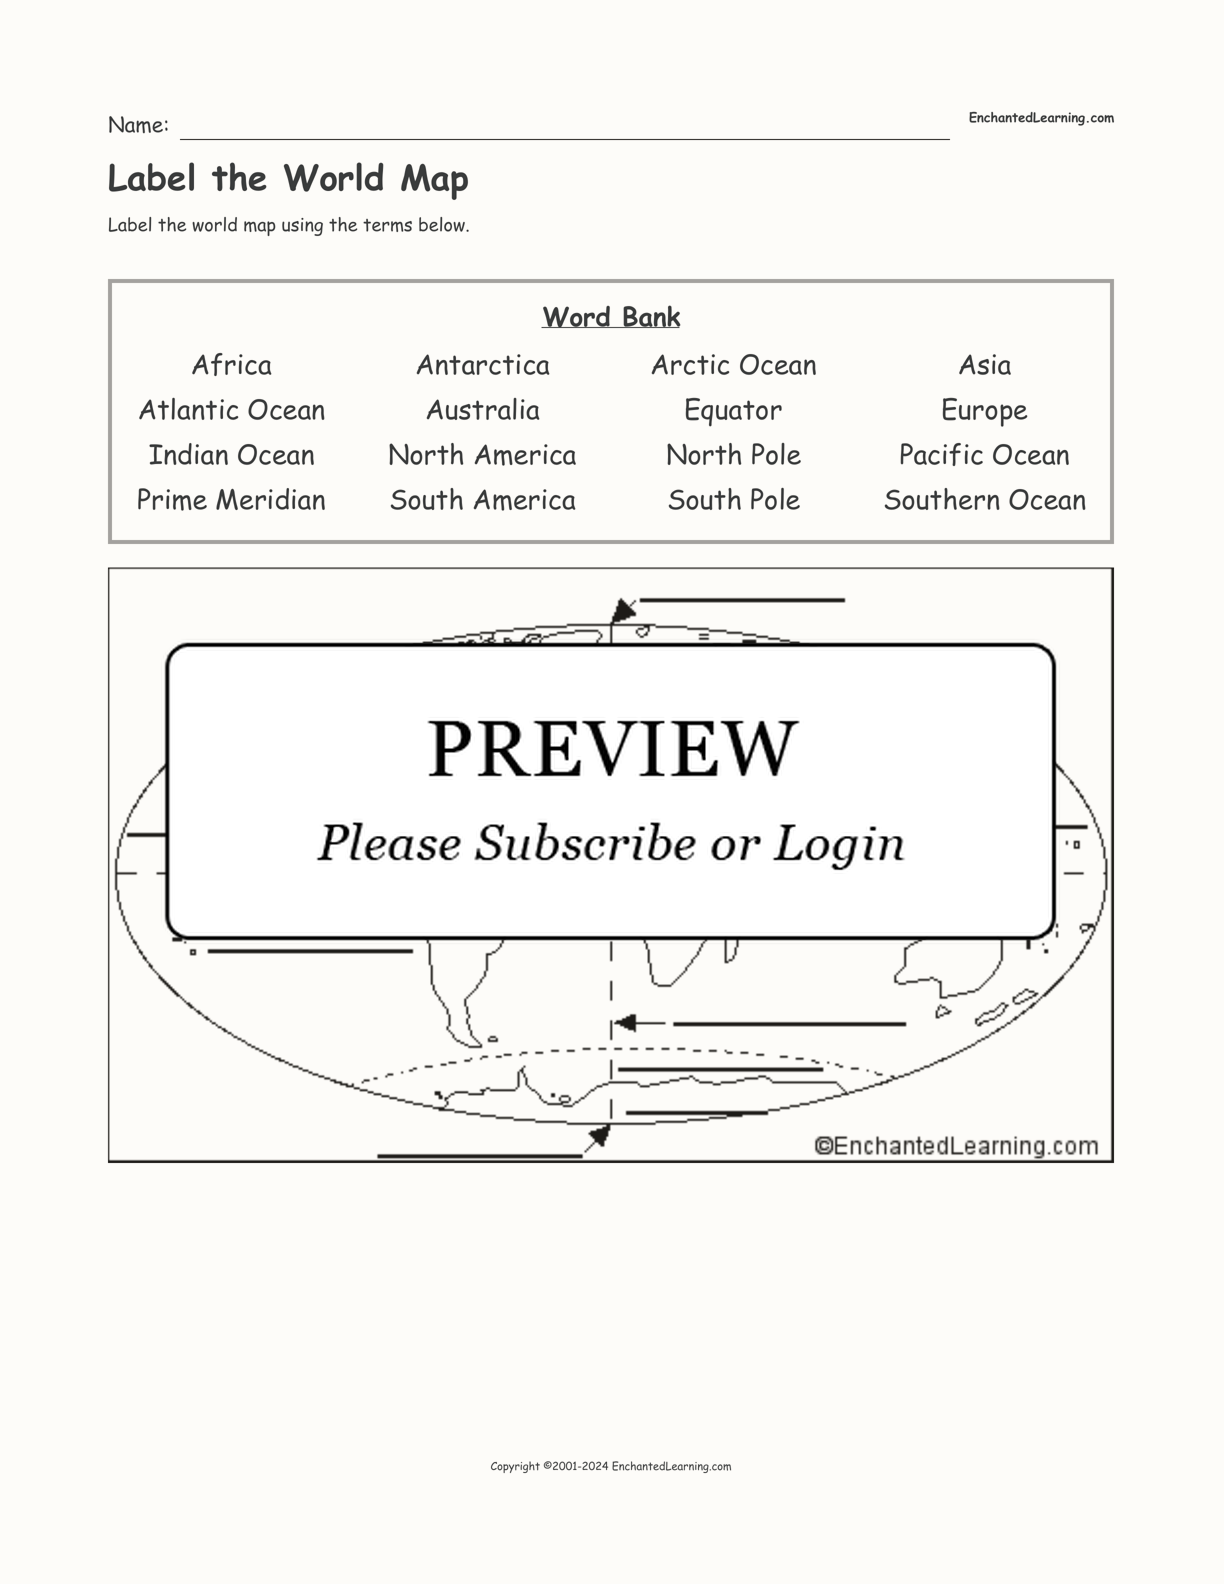 Label the World Map - Enchanted Learning For Parts Of A Map Worksheet